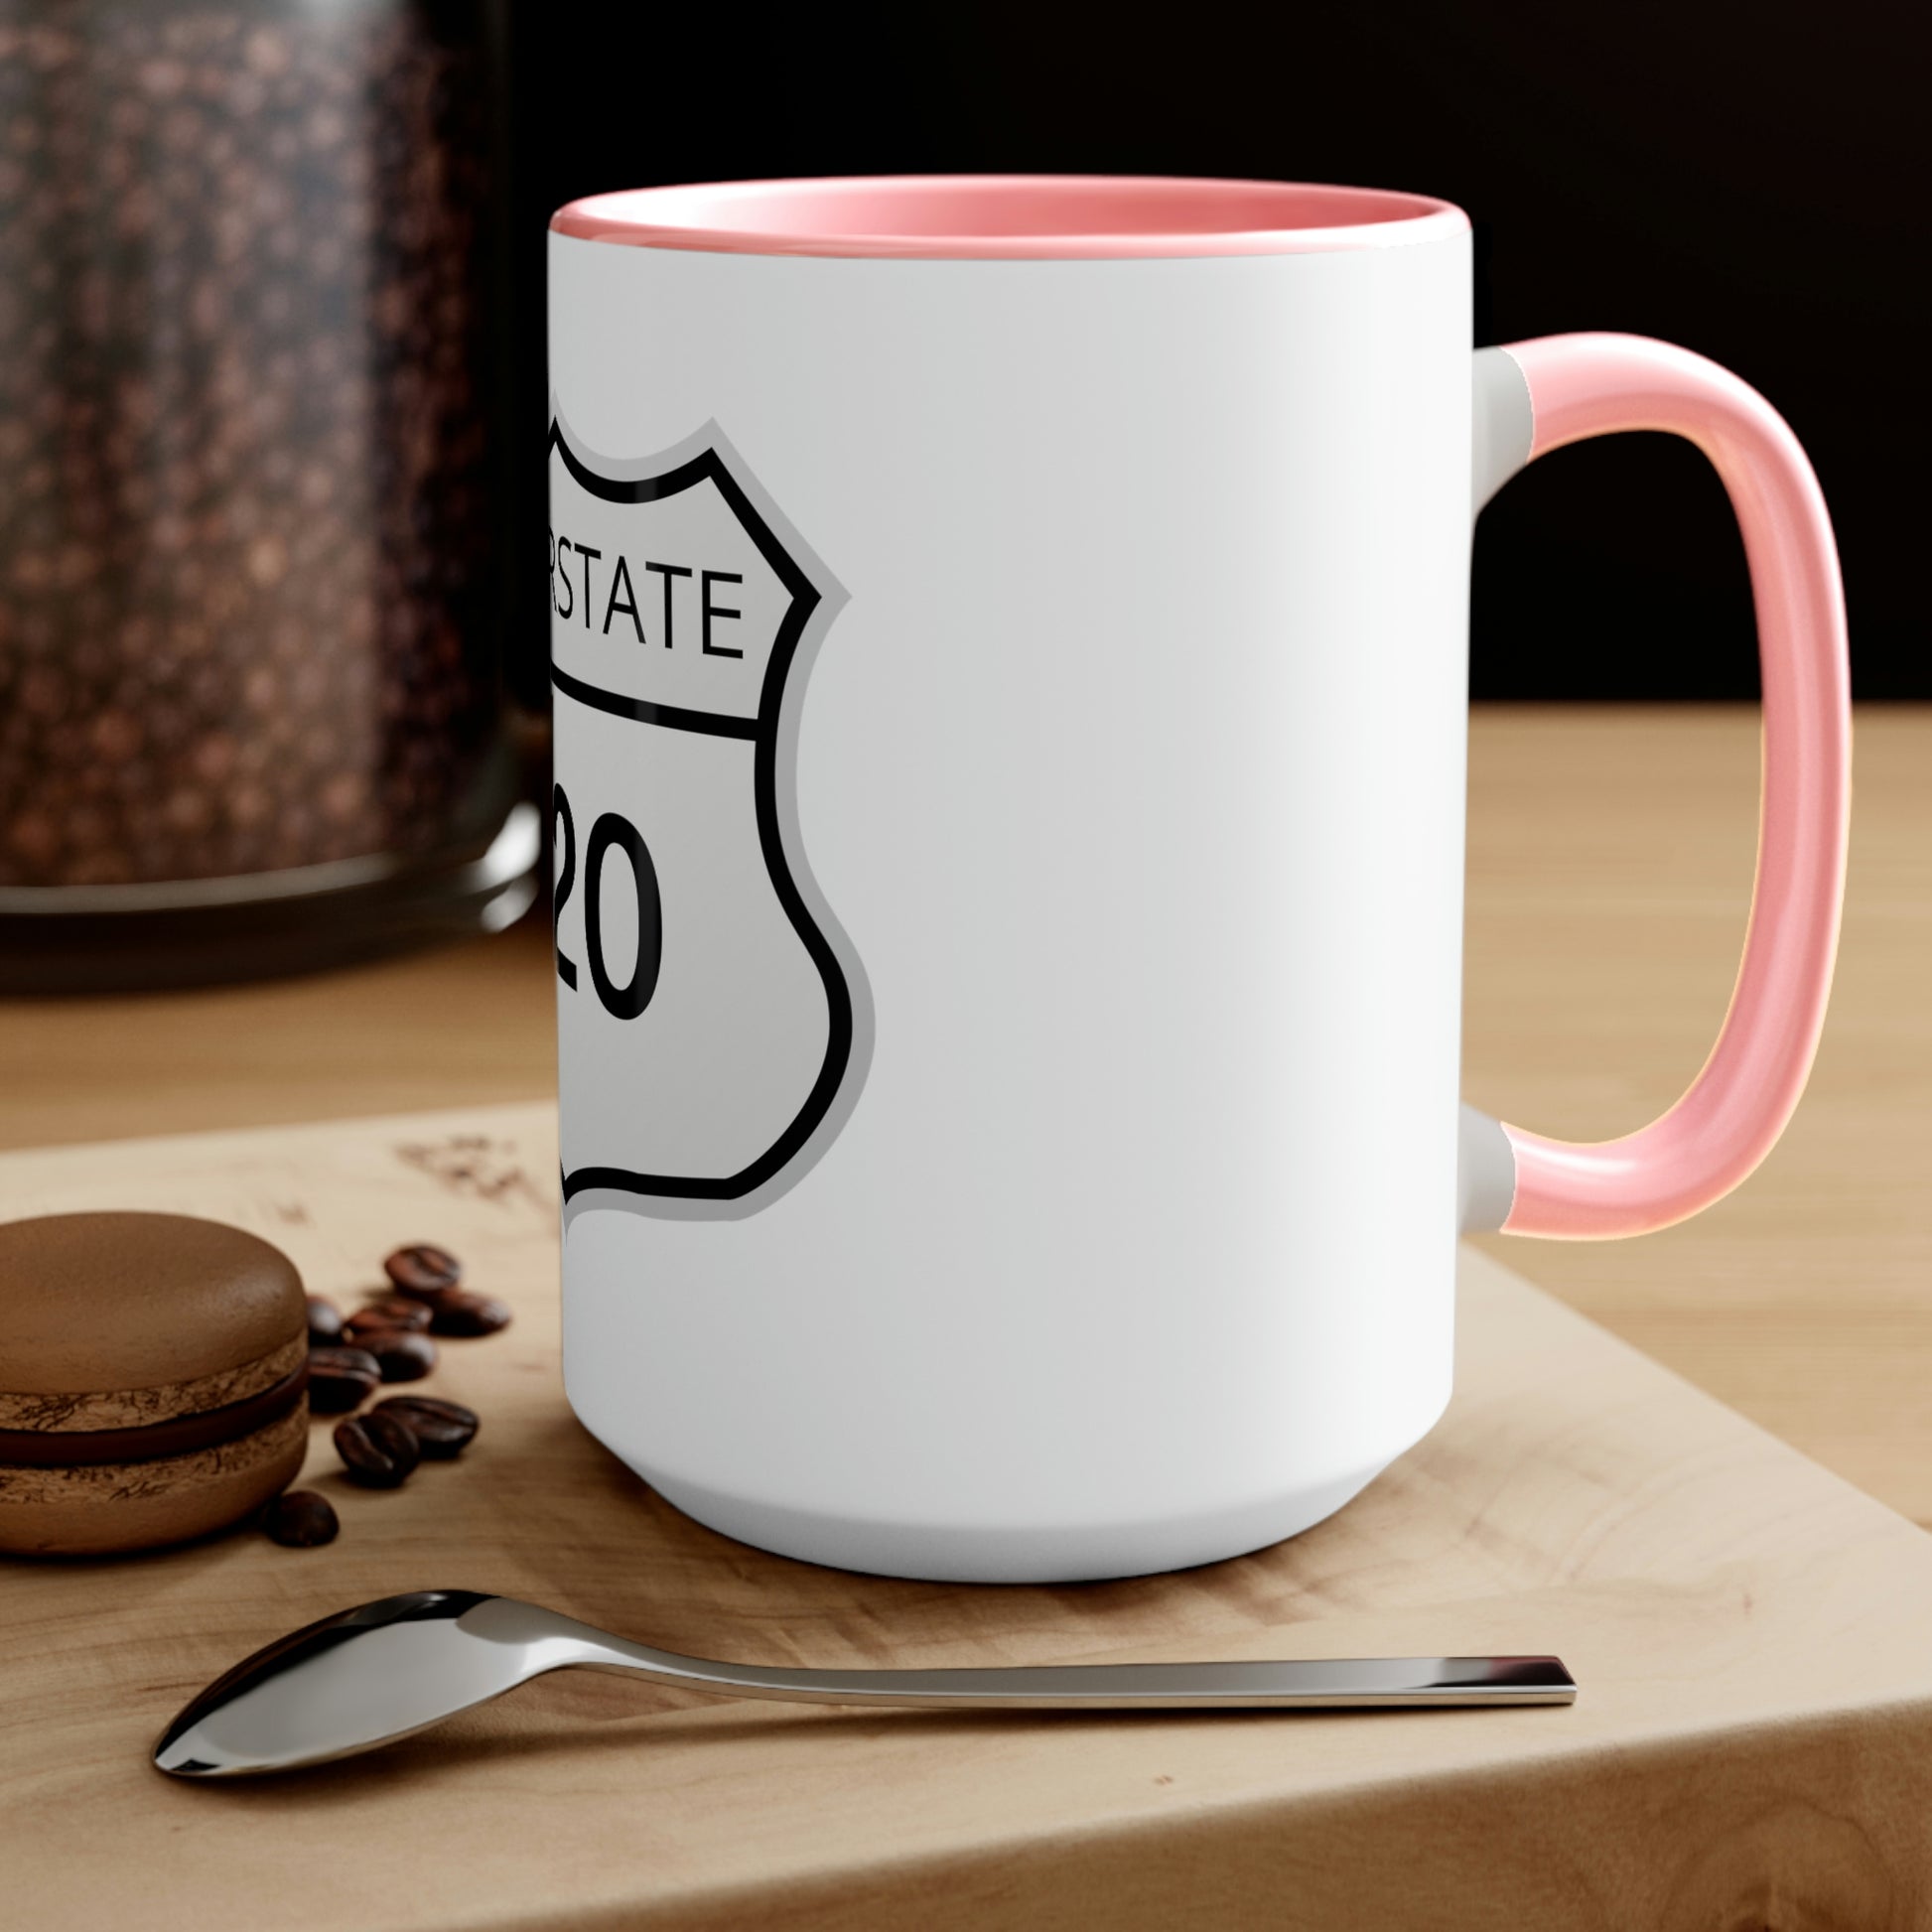 Interstate 420 Two-Tone pink and white Coffee Mug on top of a wooden table